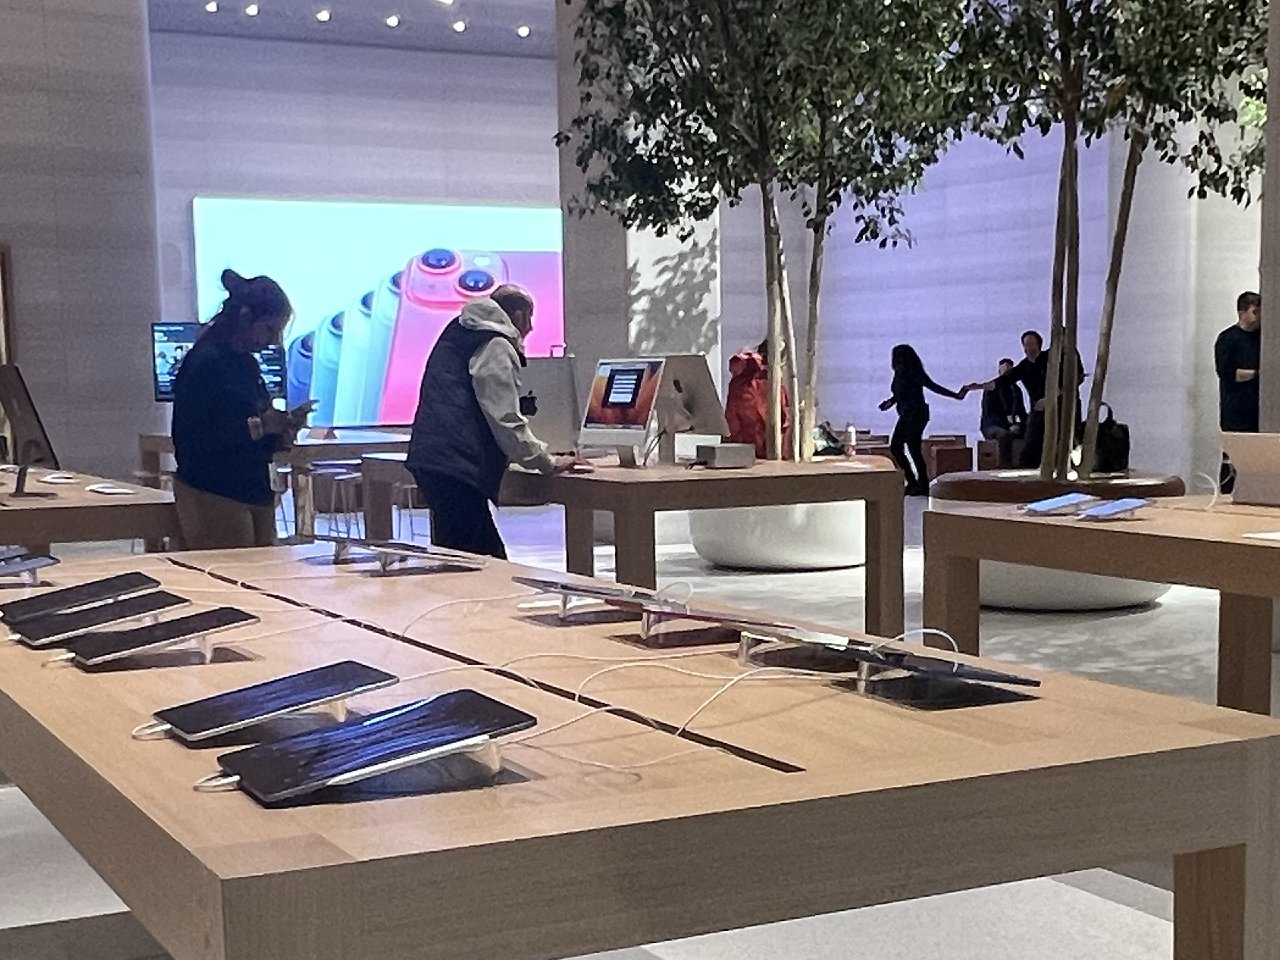 There are 17 regular Apple Store tables among the trees.